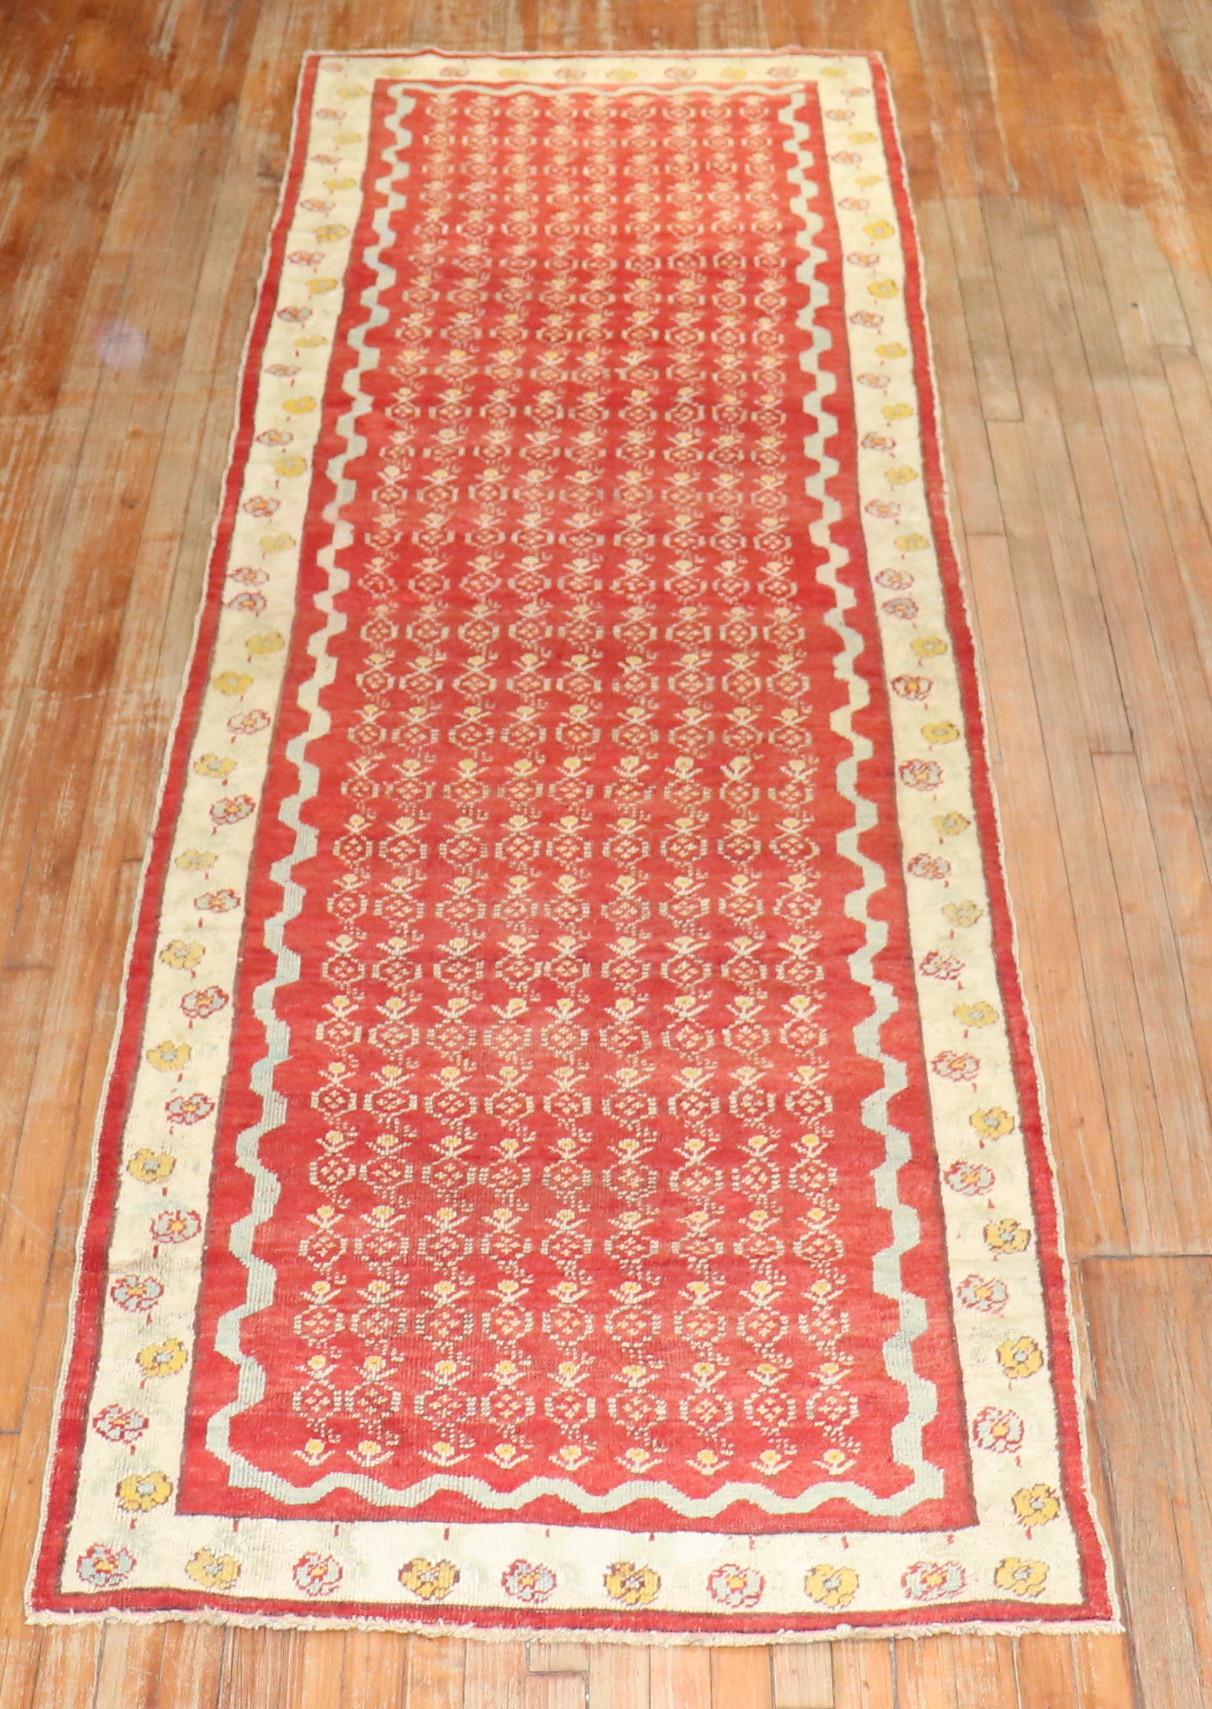 A vivacious antique Turkish Ghiordes runner. Floral in the field and border. The ground is red, the border is ivory, accents in light blue and goldenrod,

circa 1910. Measures: 3'6